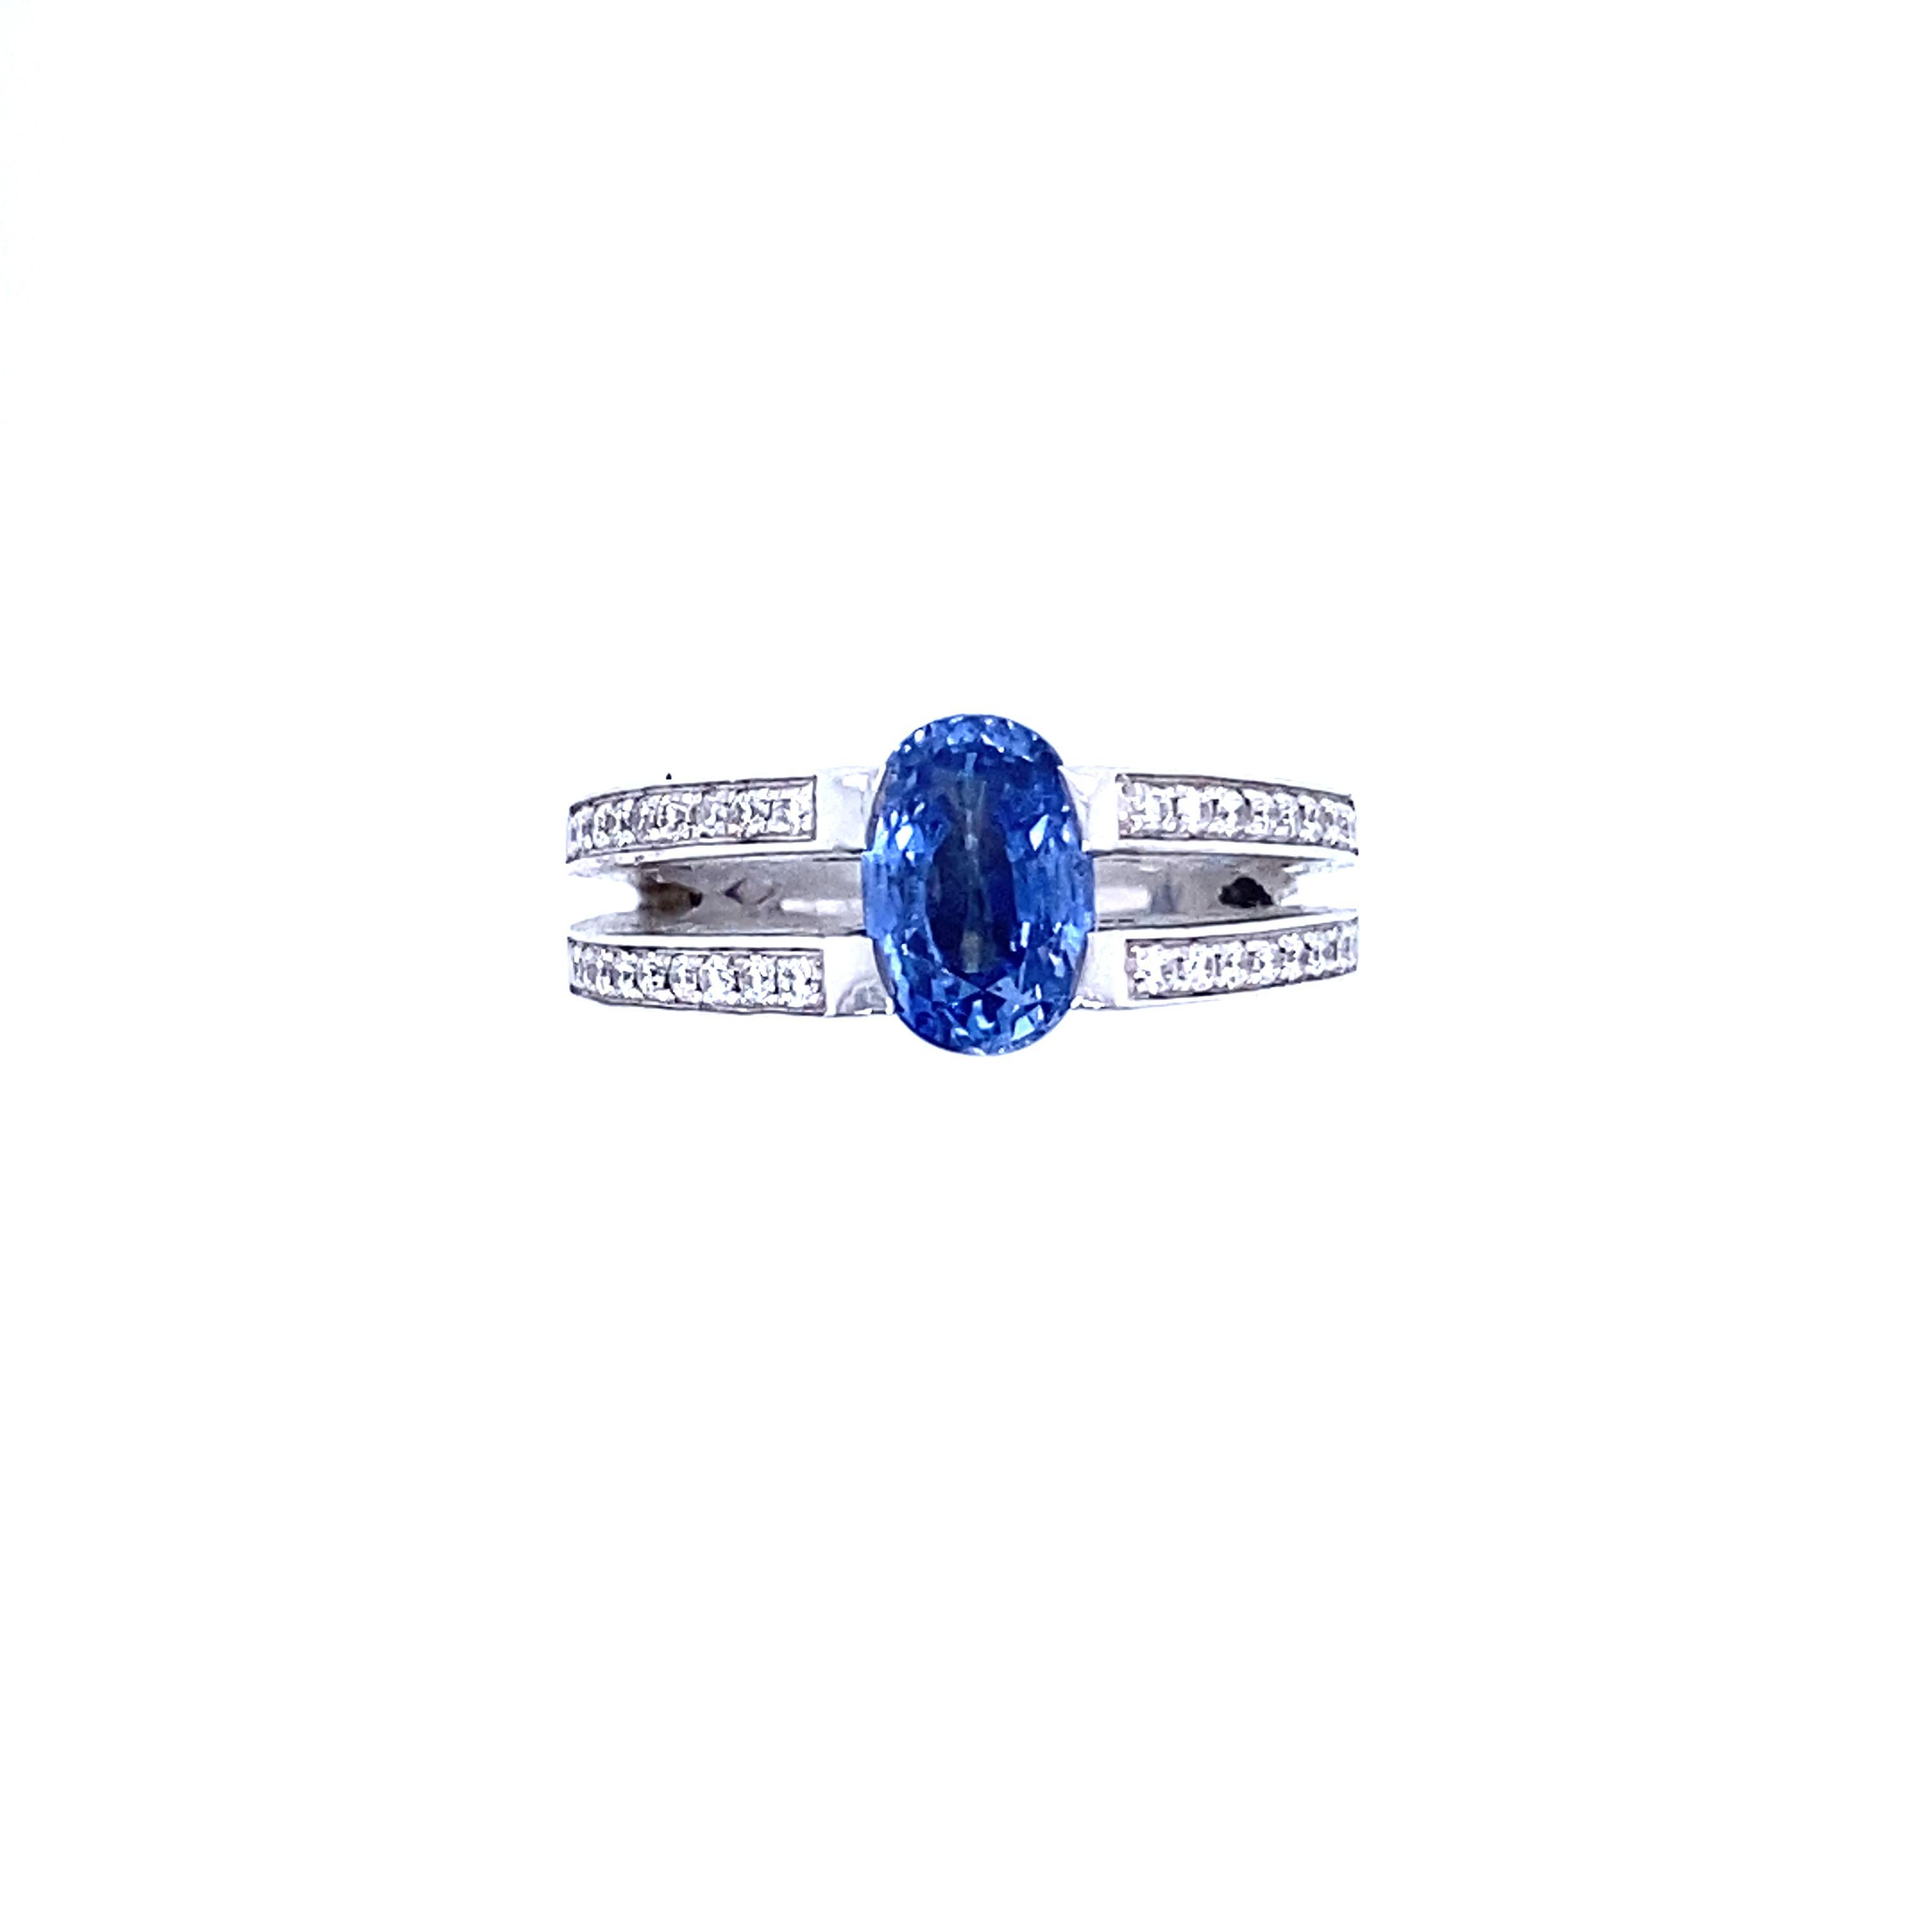 Women's White Gold Ring 2.2 Carat Sapphire and 0.27 Carat Diamonds For Sale